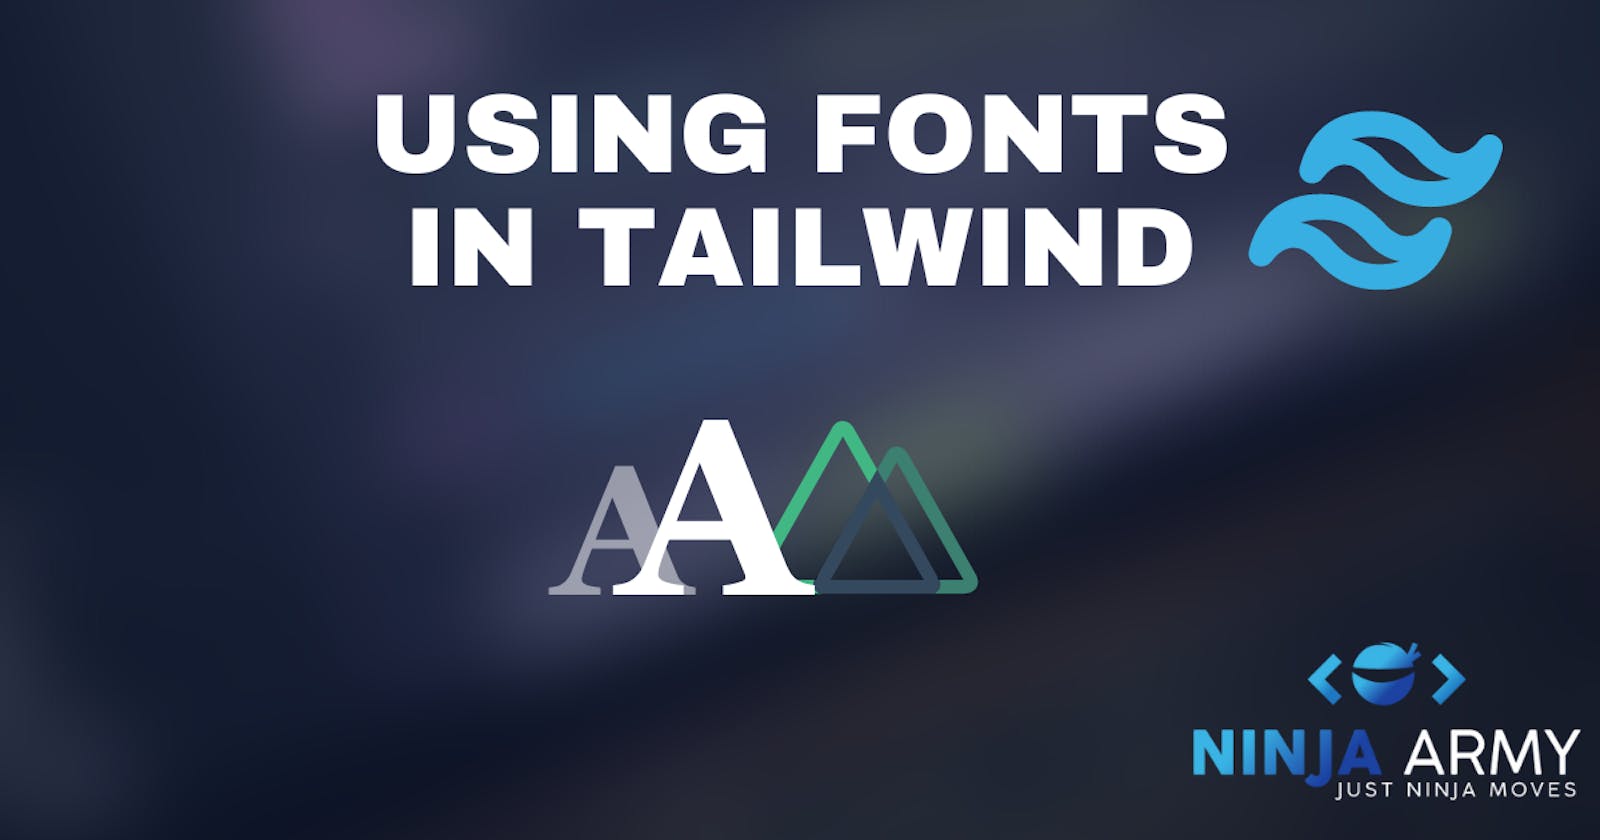 Using fonts in tailwind